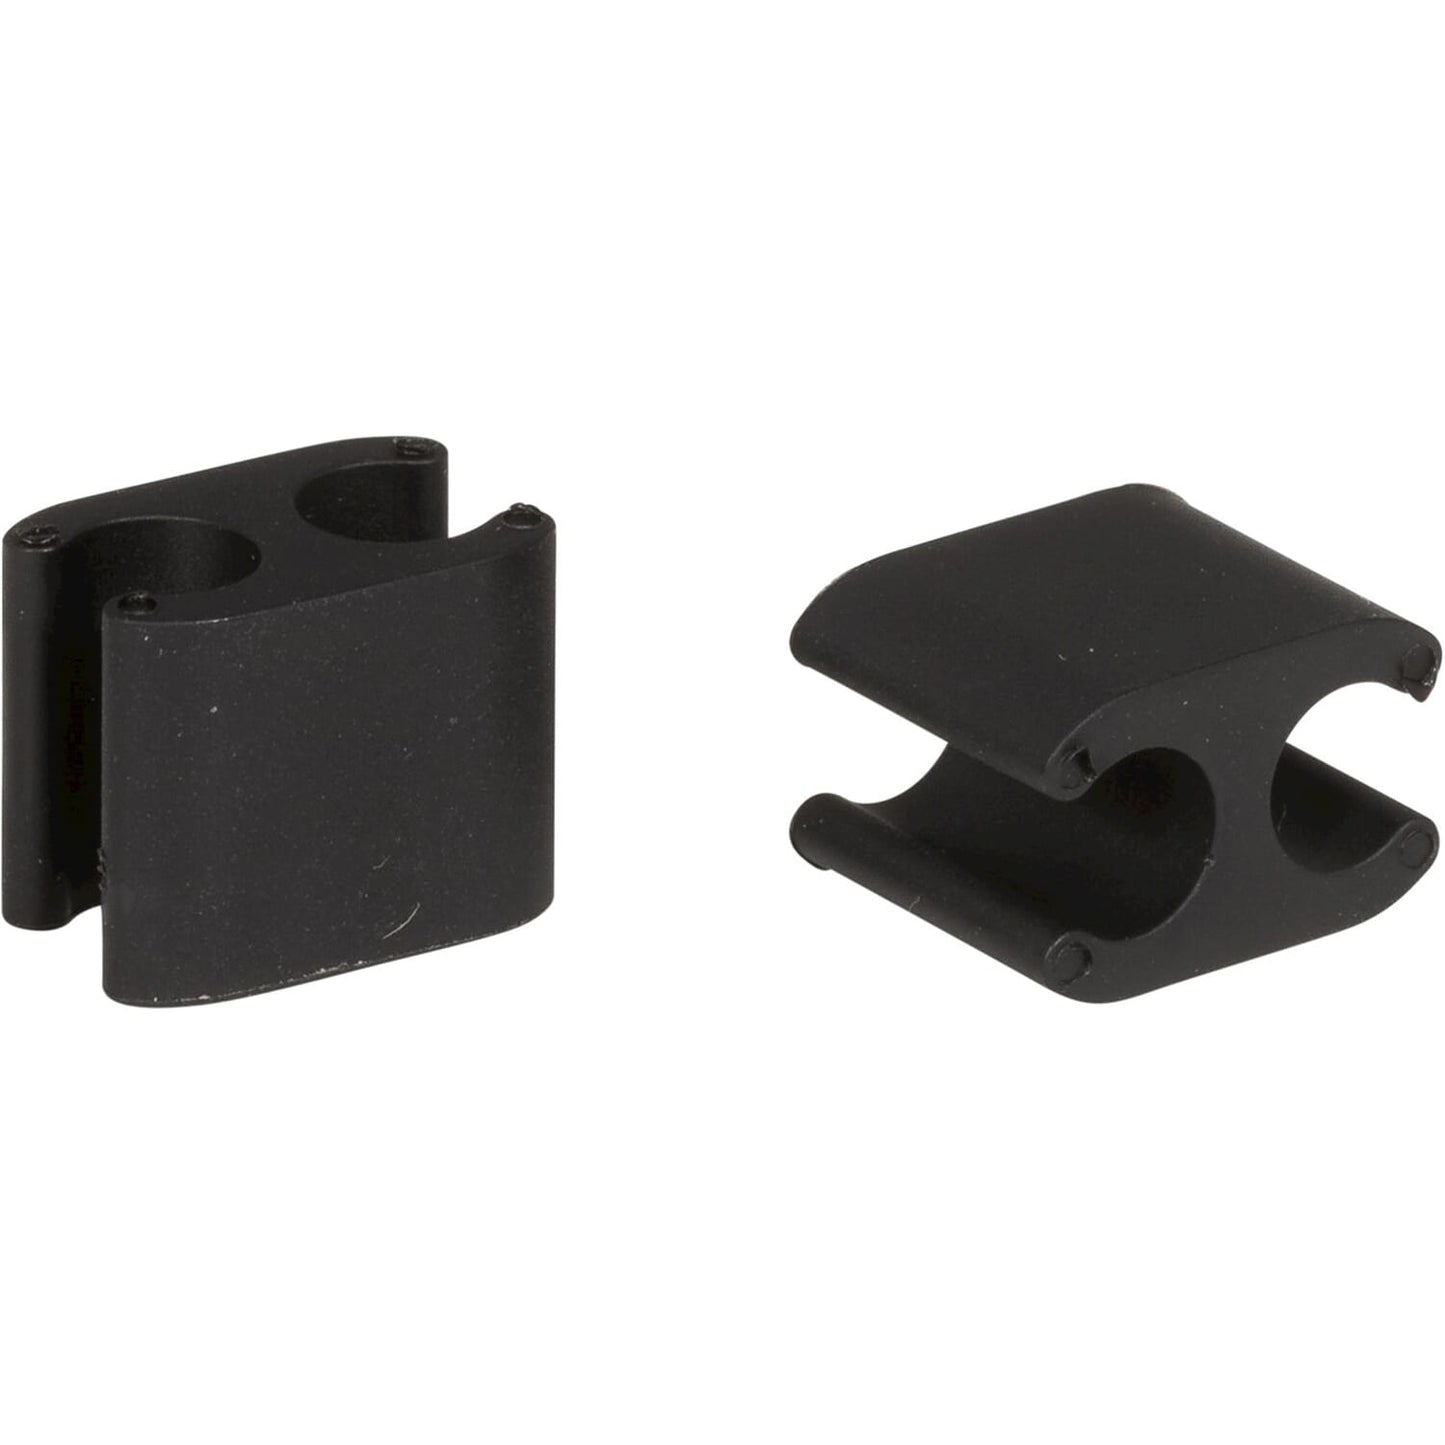 Elvedes Cable Clips Duo Black 5+2.5 mm (Tue2) (X10) CP2020101